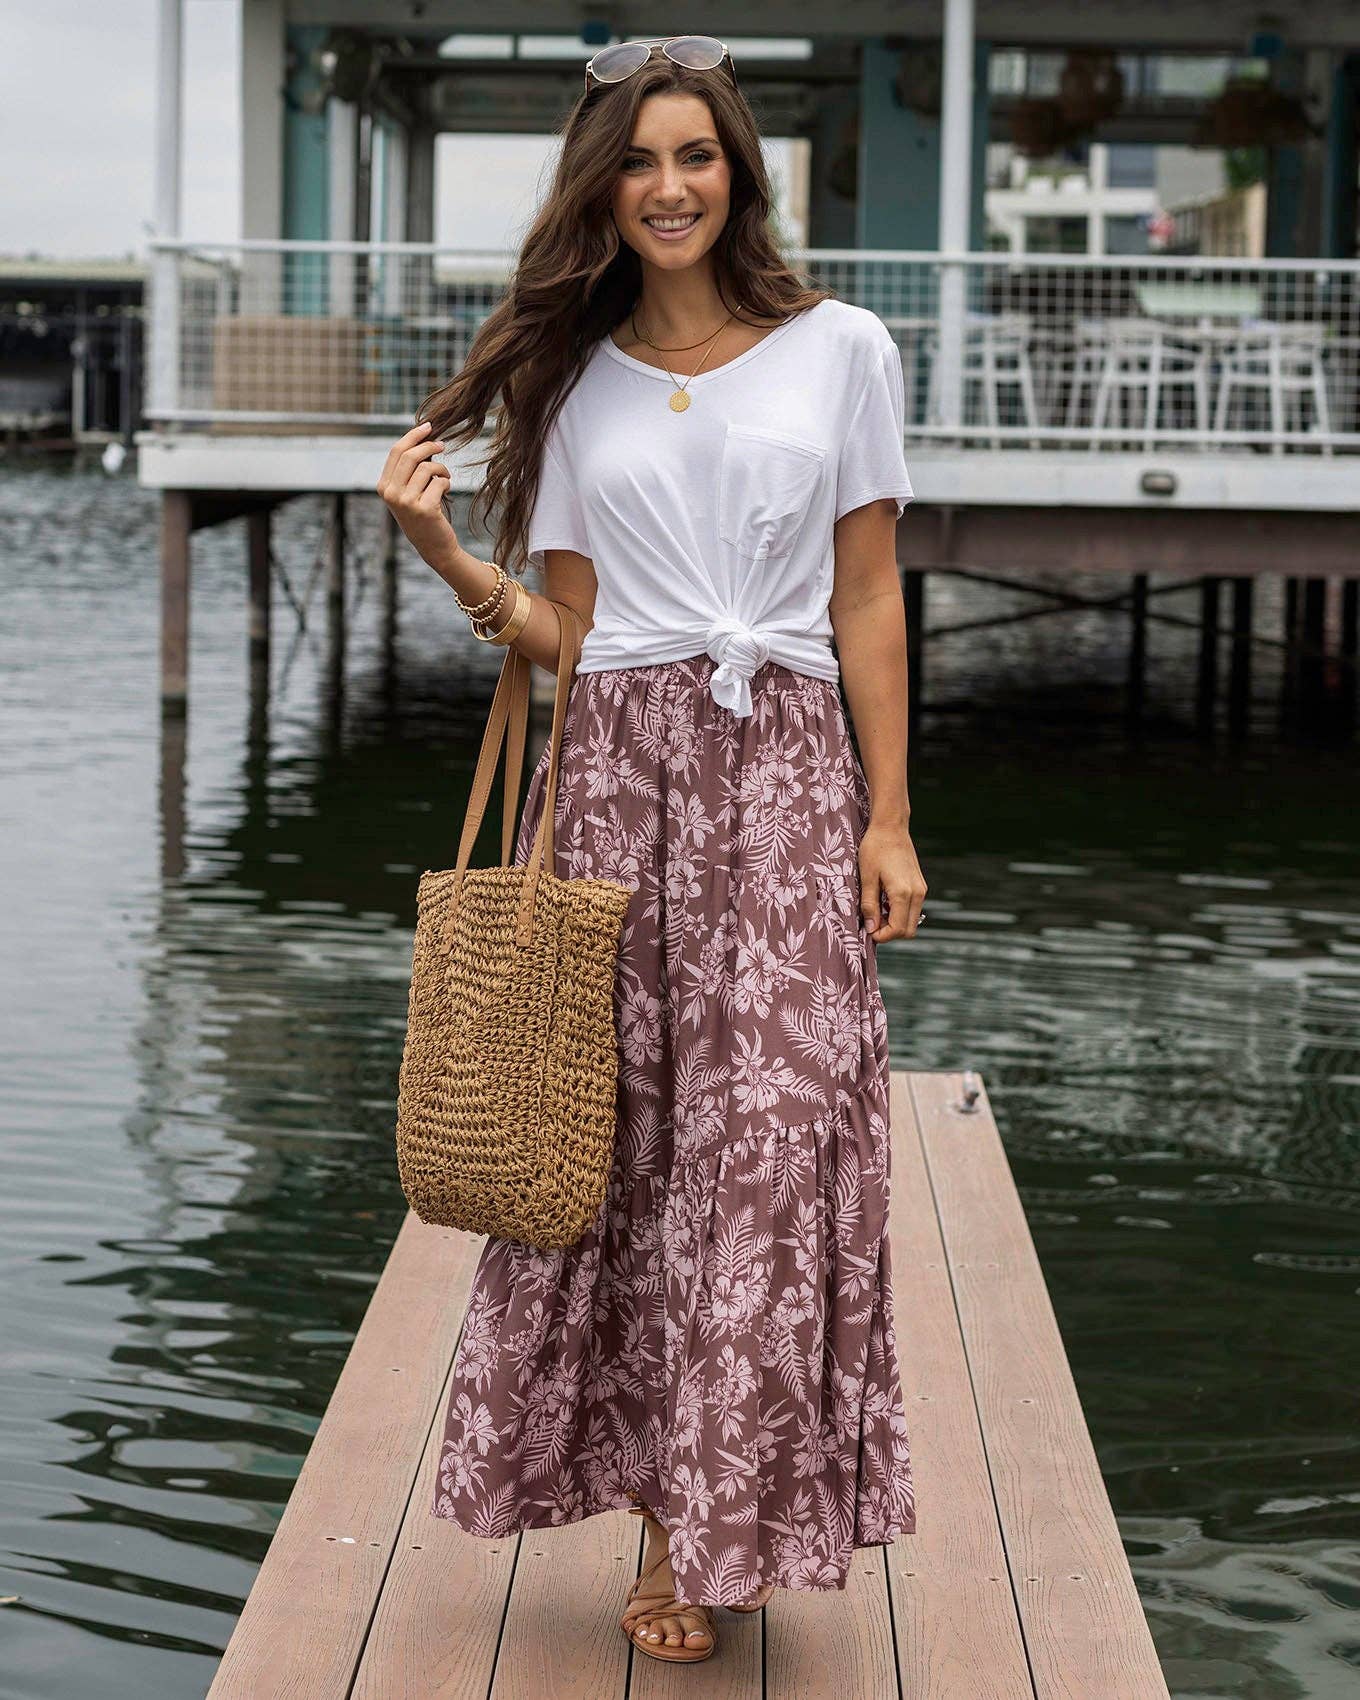 Pocketed Tiered Maxi Skirt in Pink Floral Spring-Summer Grace and Lace